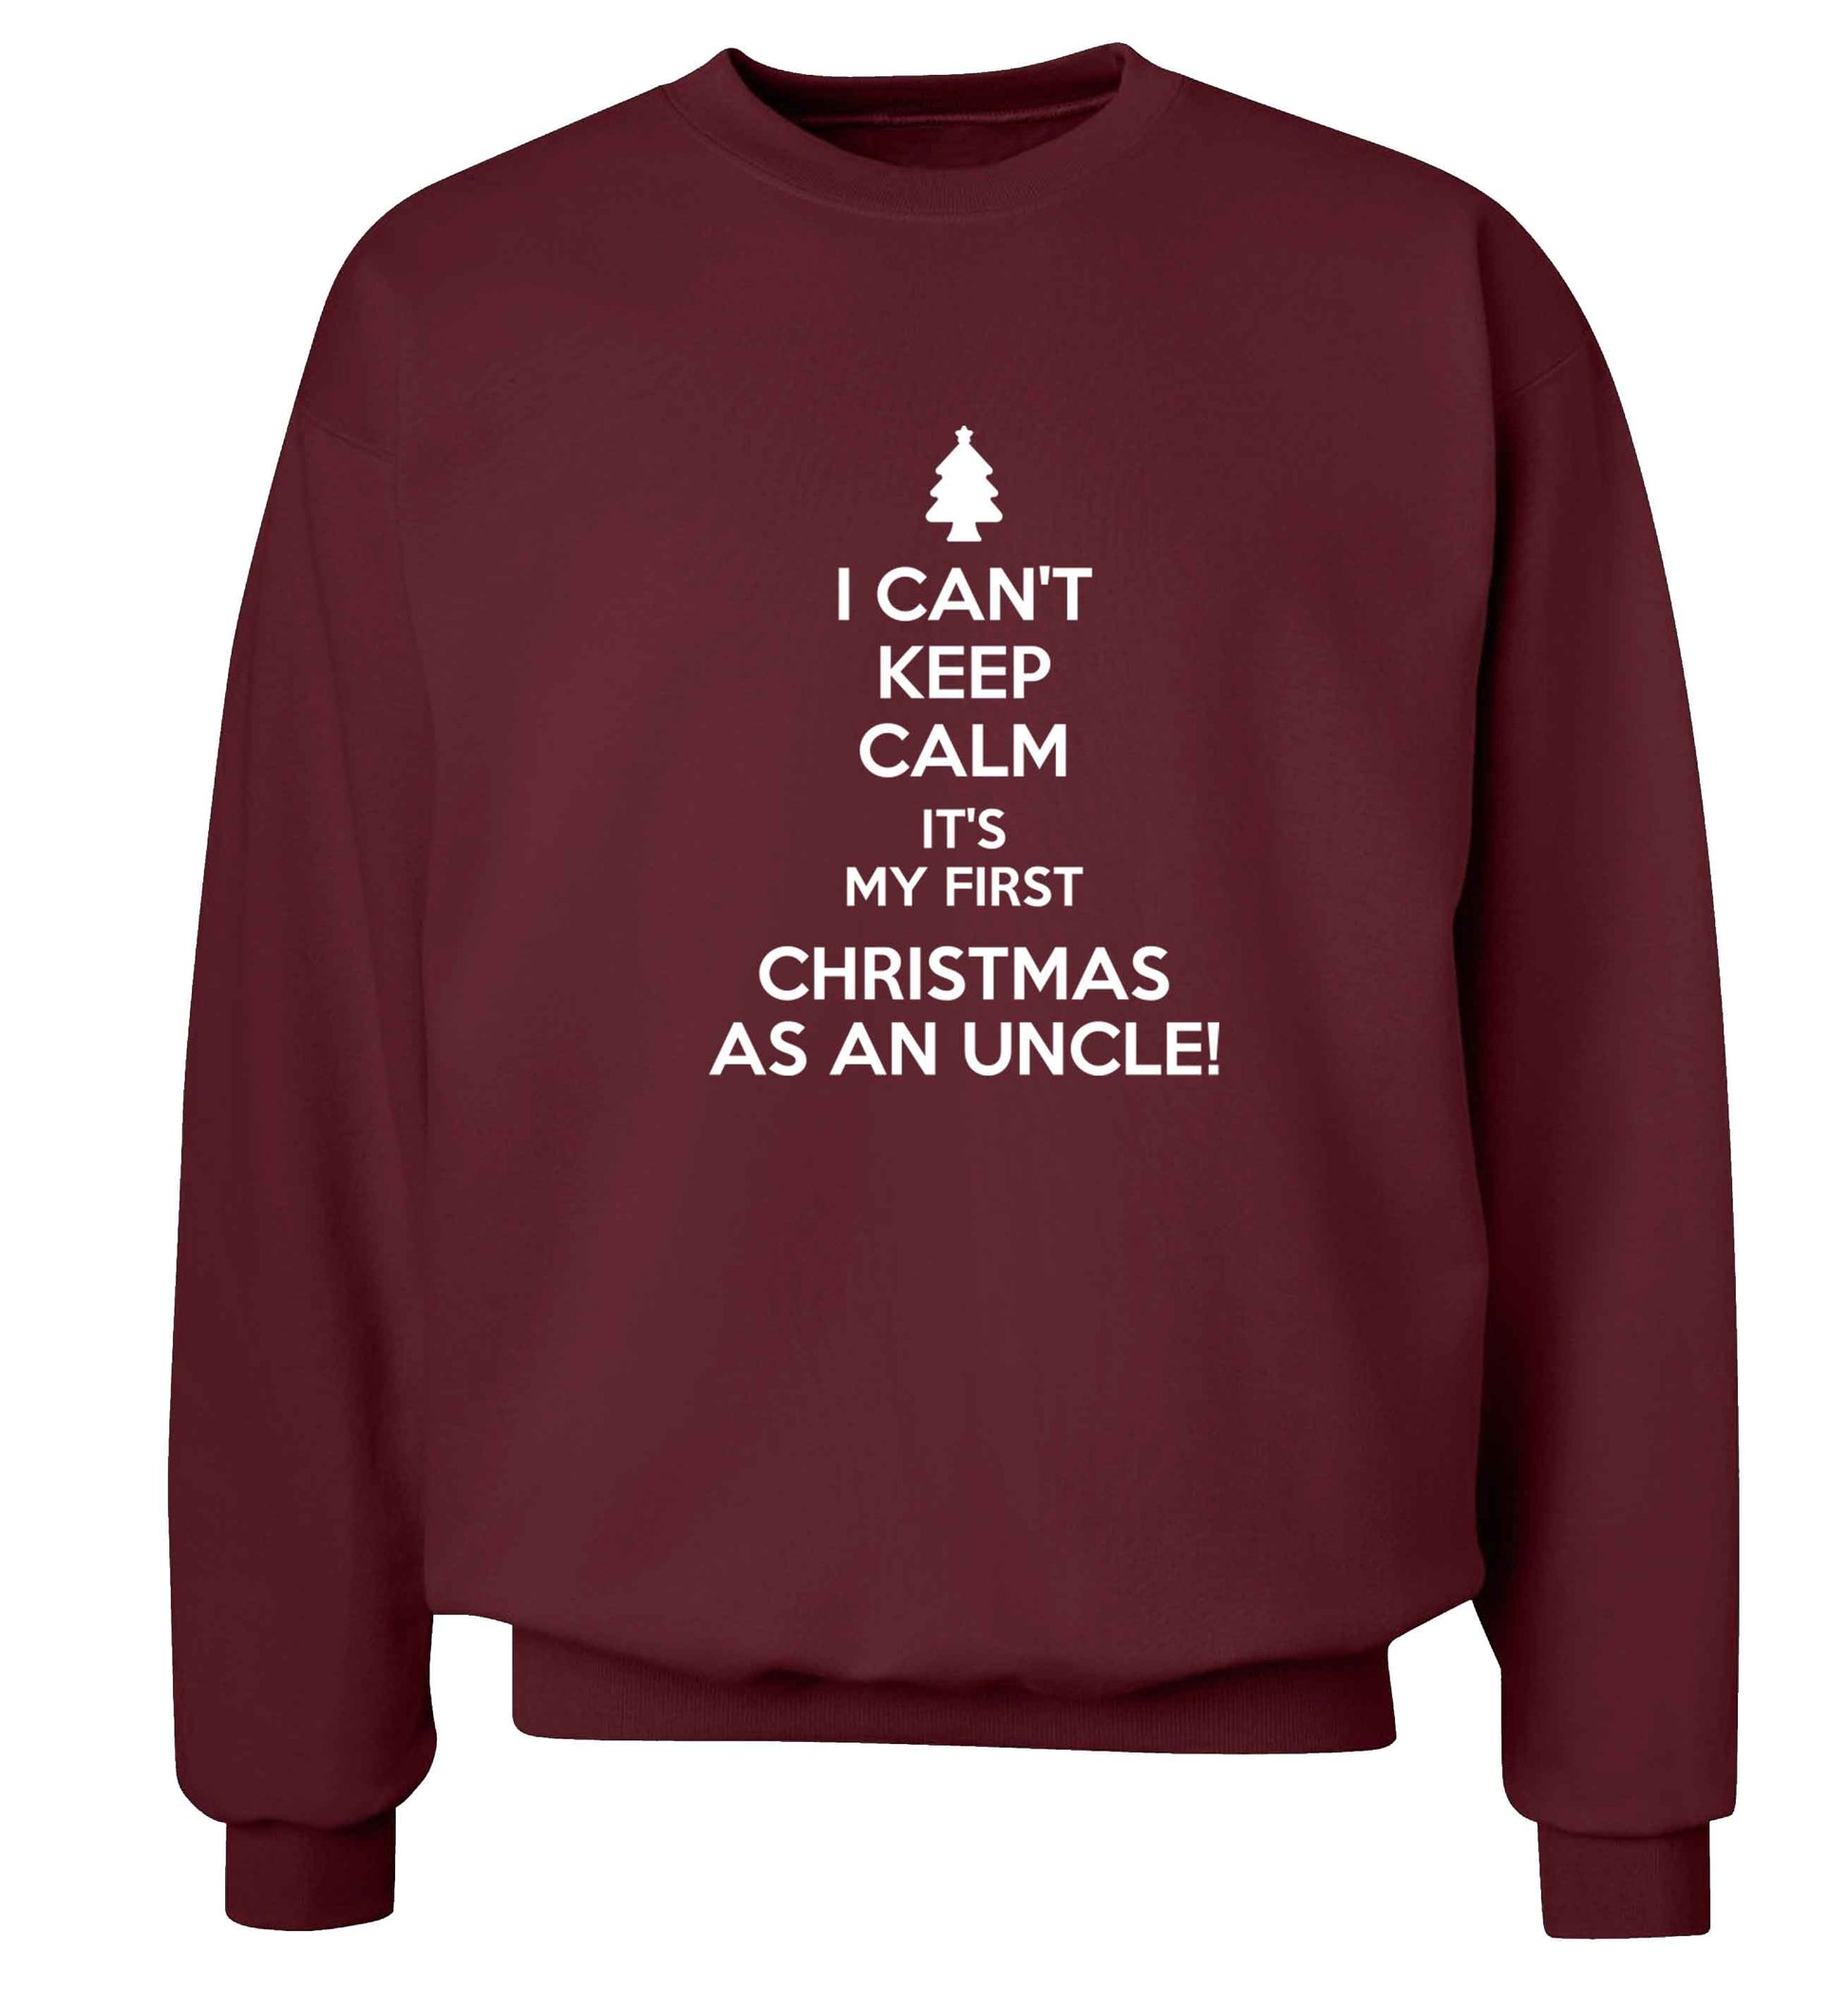 I can't keep calm it's my first Christmas as an uncle! Adult's unisex maroon Sweater 2XL